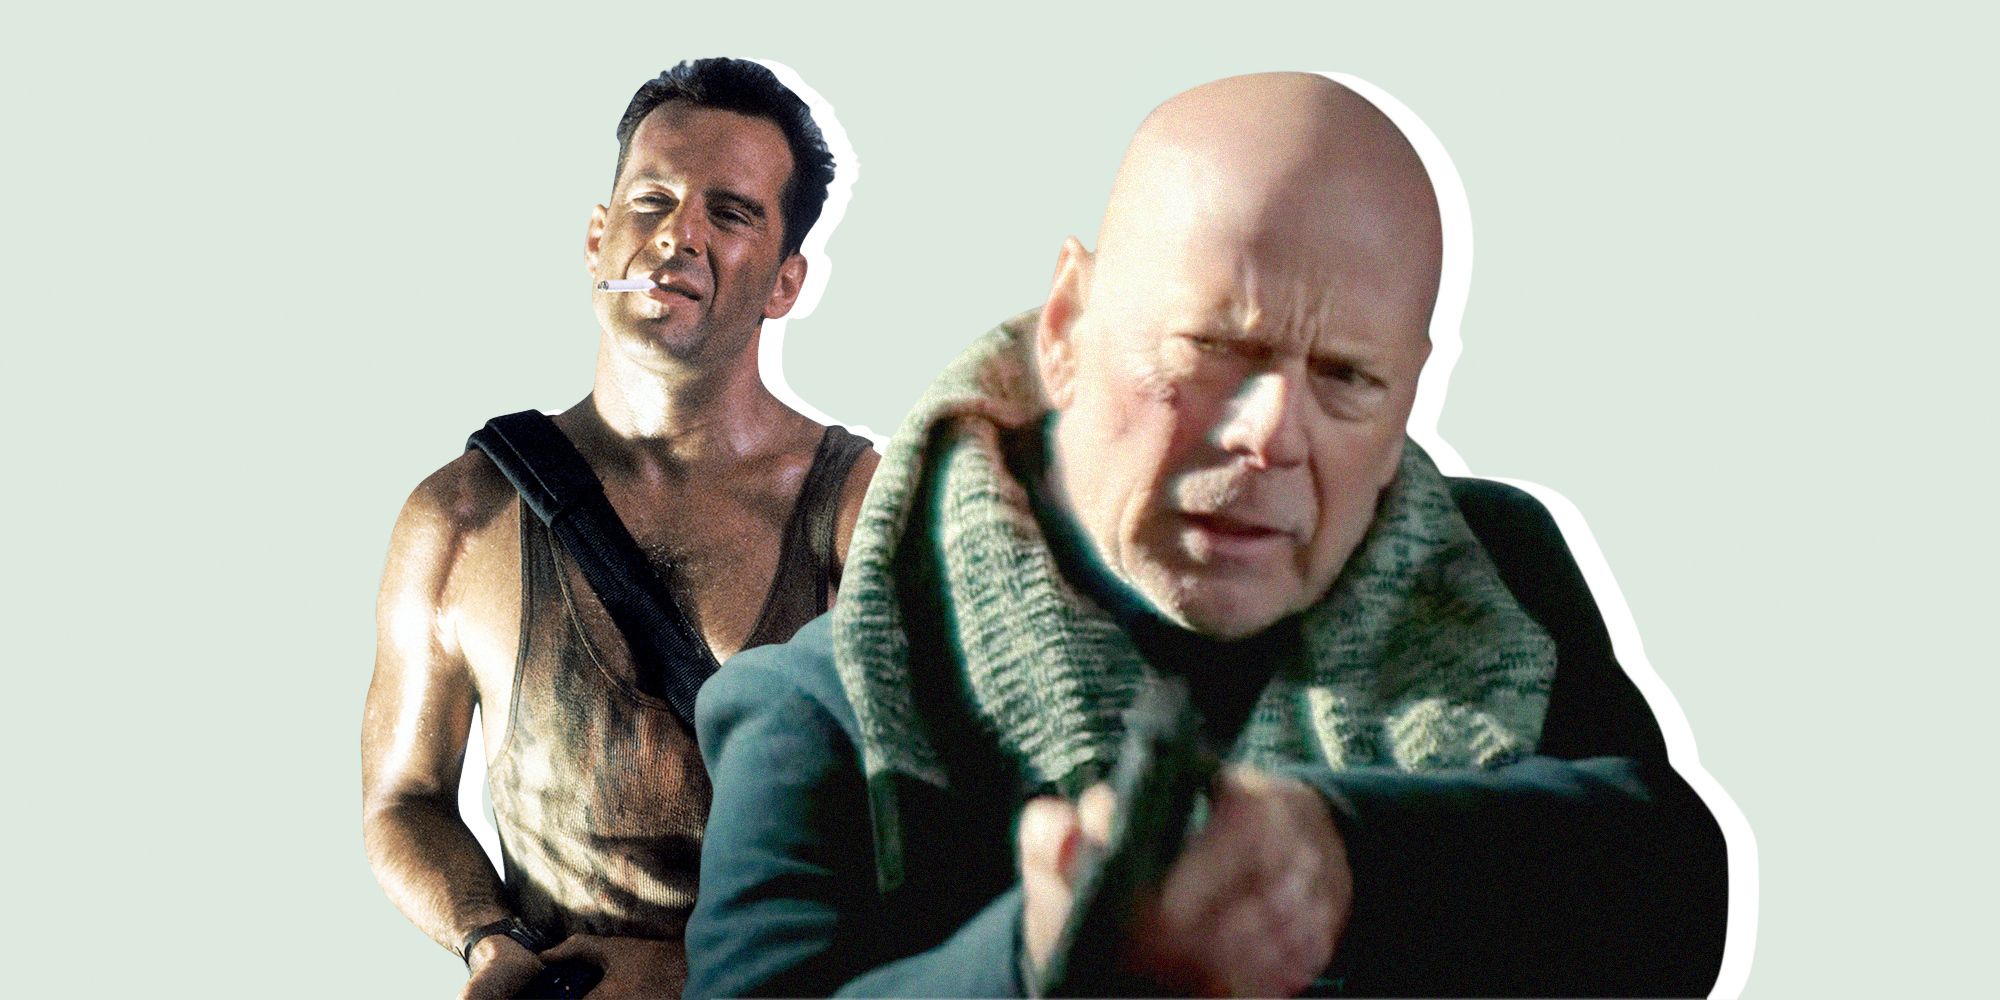 Why Does Bruce Willis Keep Making Movies Like Hard Kill That He Clearly Hates?